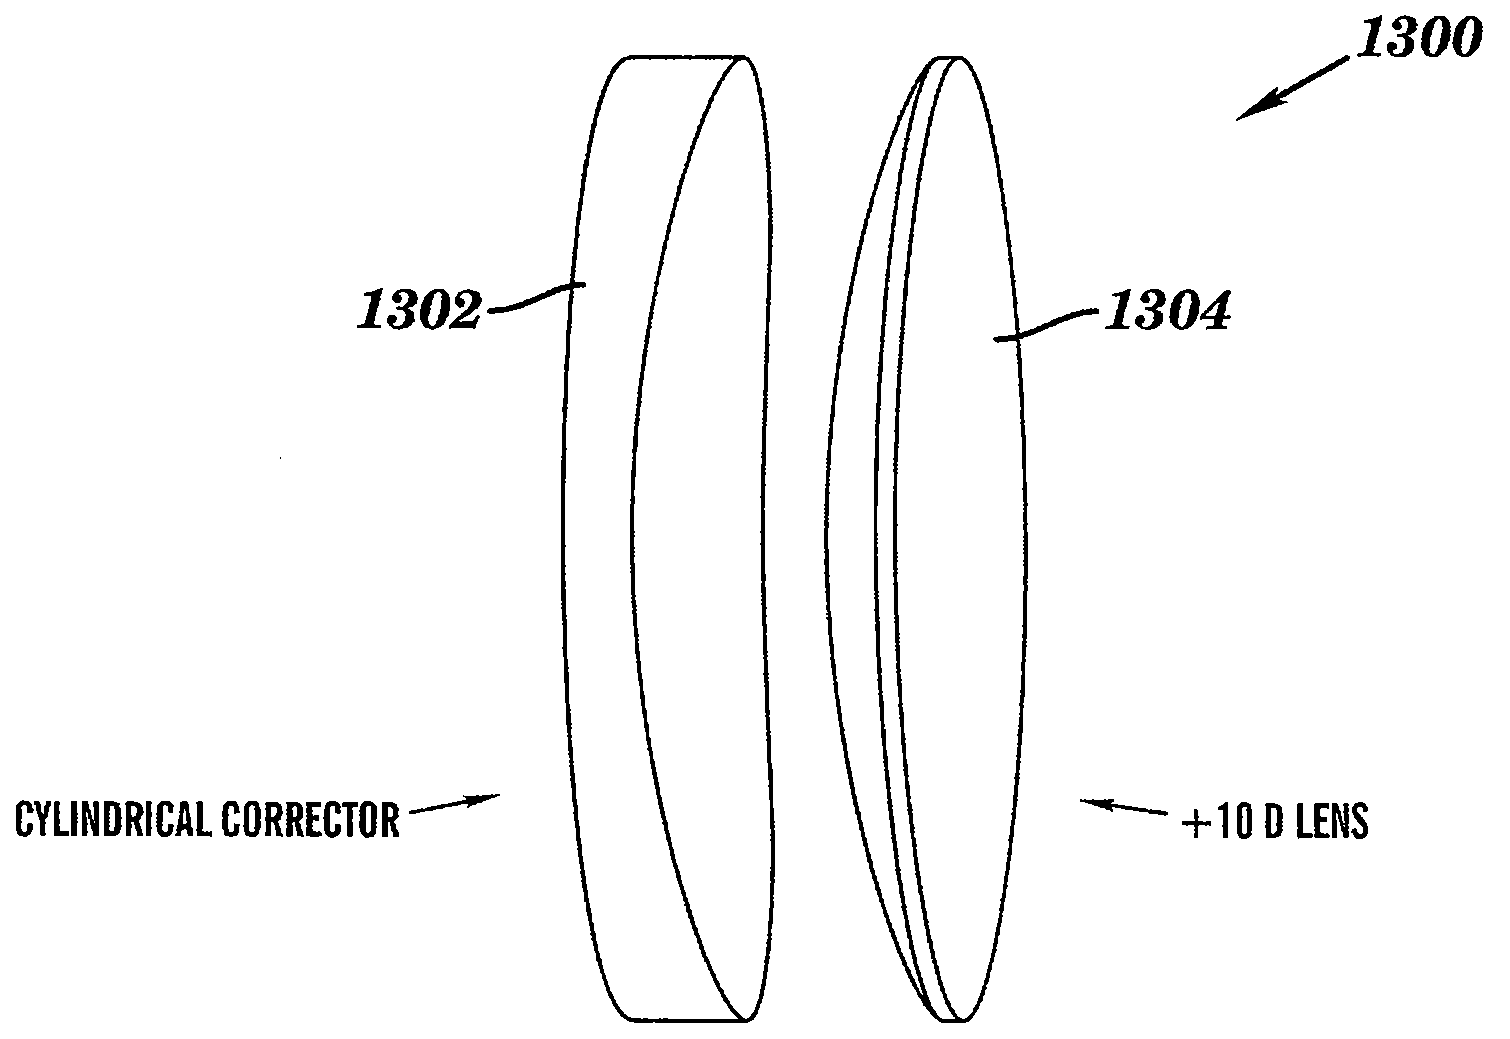 Optical elements having variable power prisms